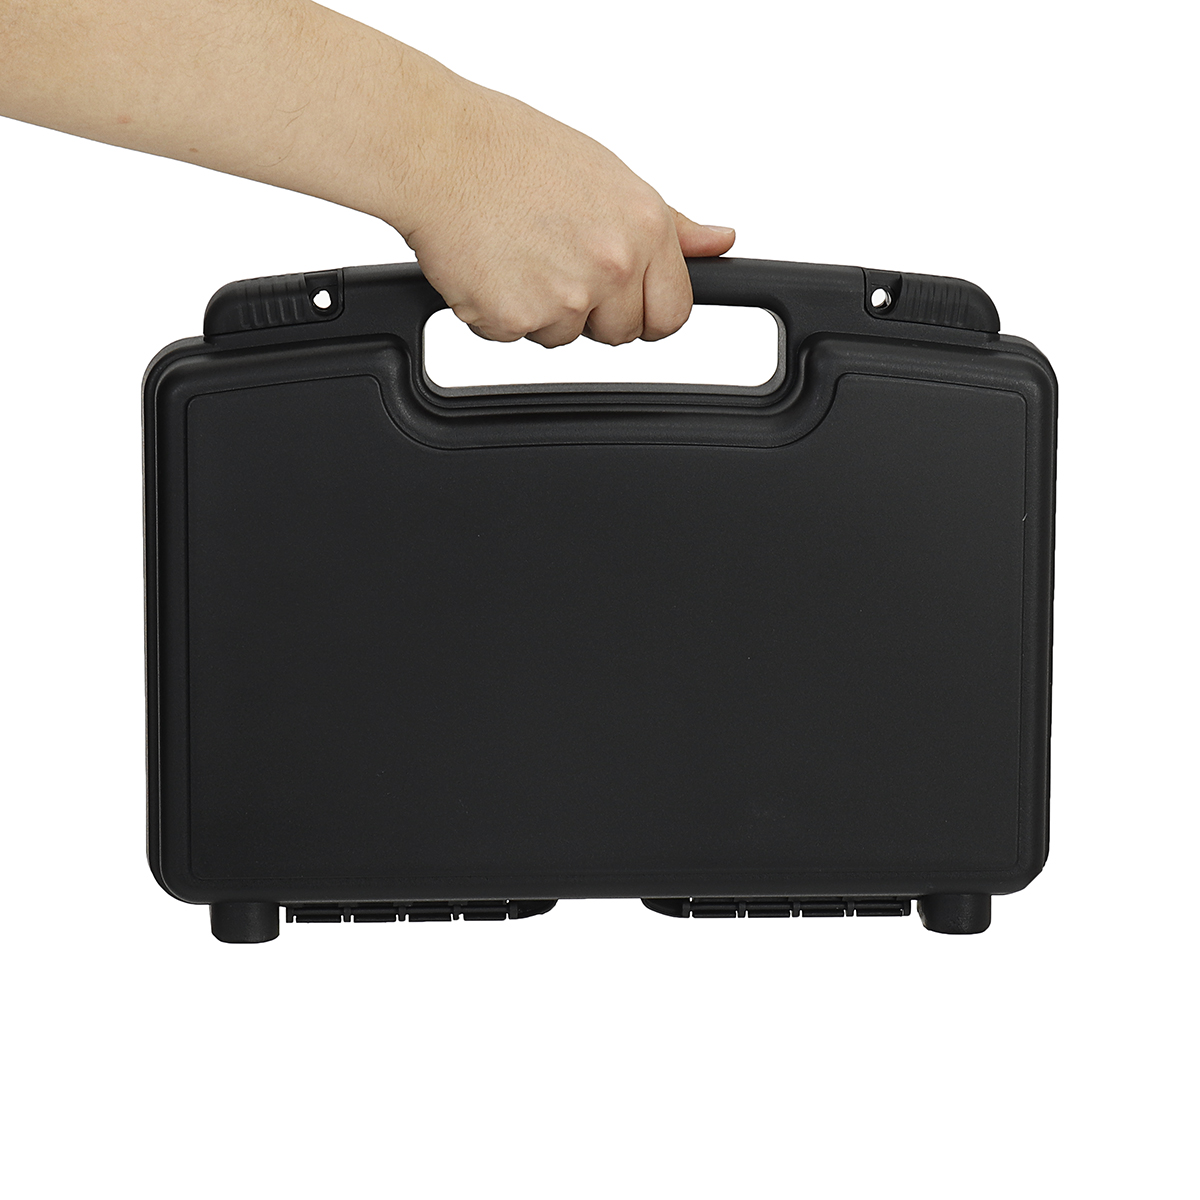 Waterproof-Hard-Carry-Tool-Case-Bag-Storage-Box-Camera-Photography-with-Foam-1791082-11